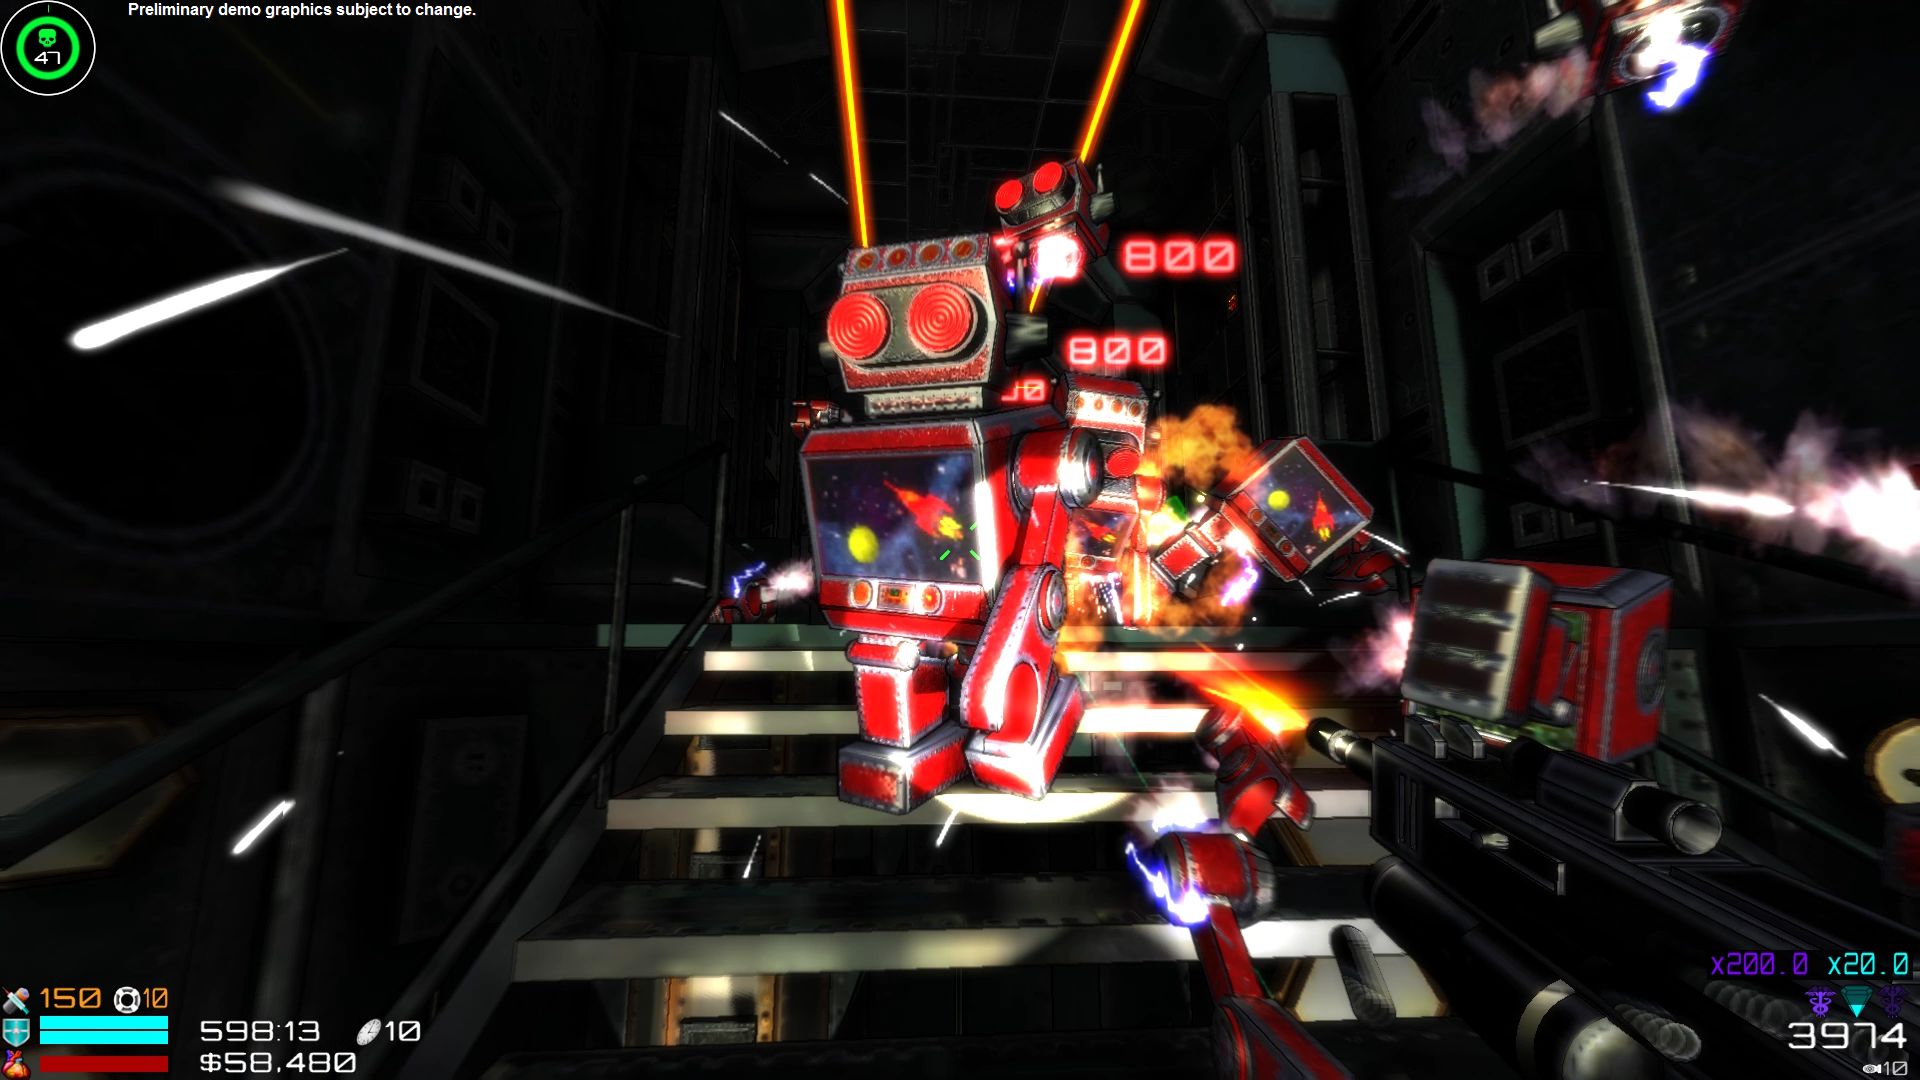 Attack Of The Retro Bots Free Download